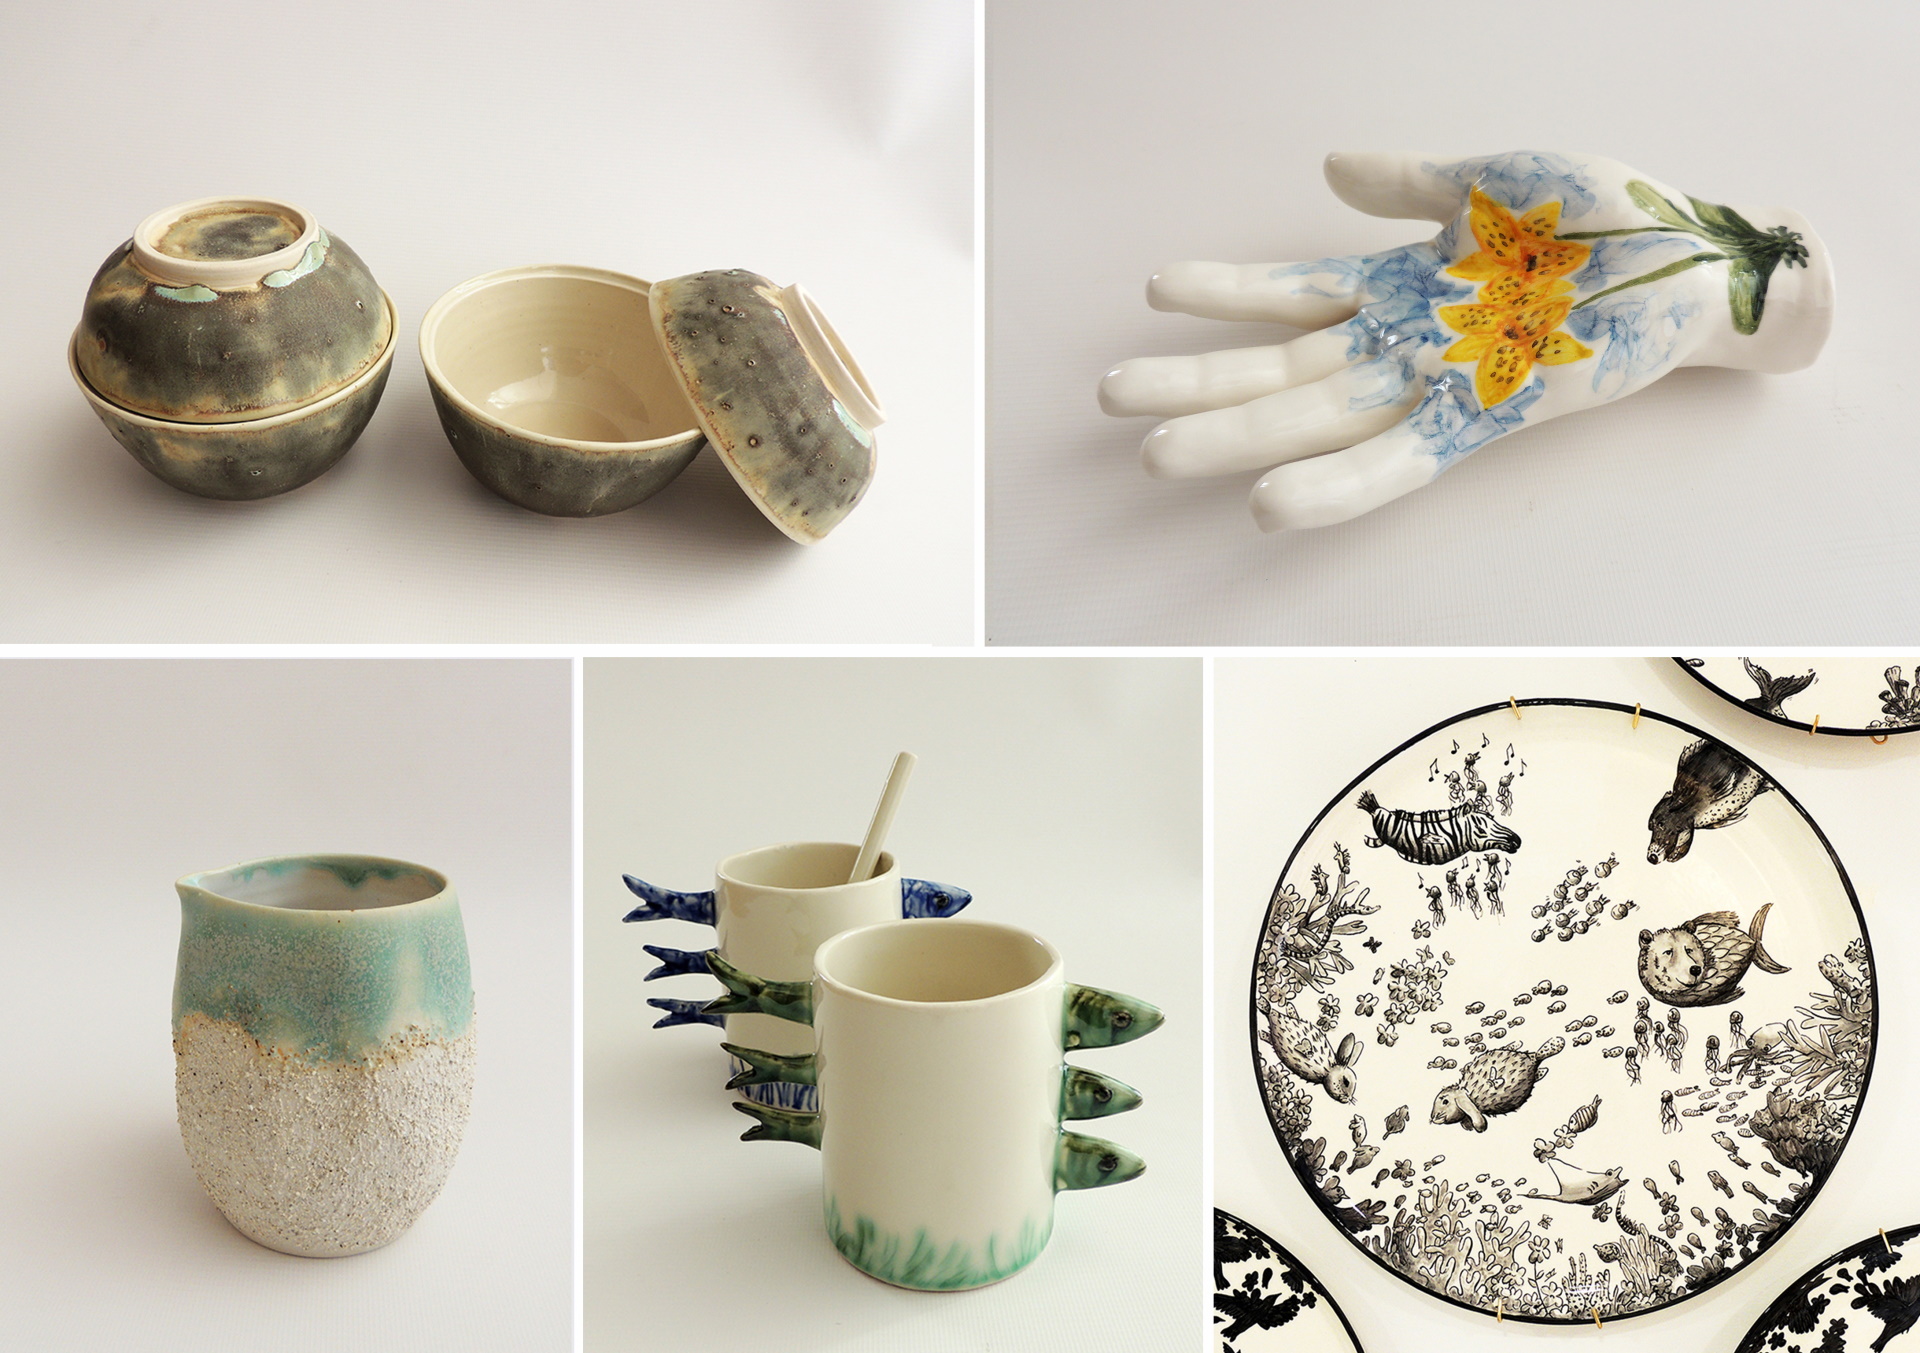 Maria’s light-filled workshop in Malaga is perfect for her marine ceramics